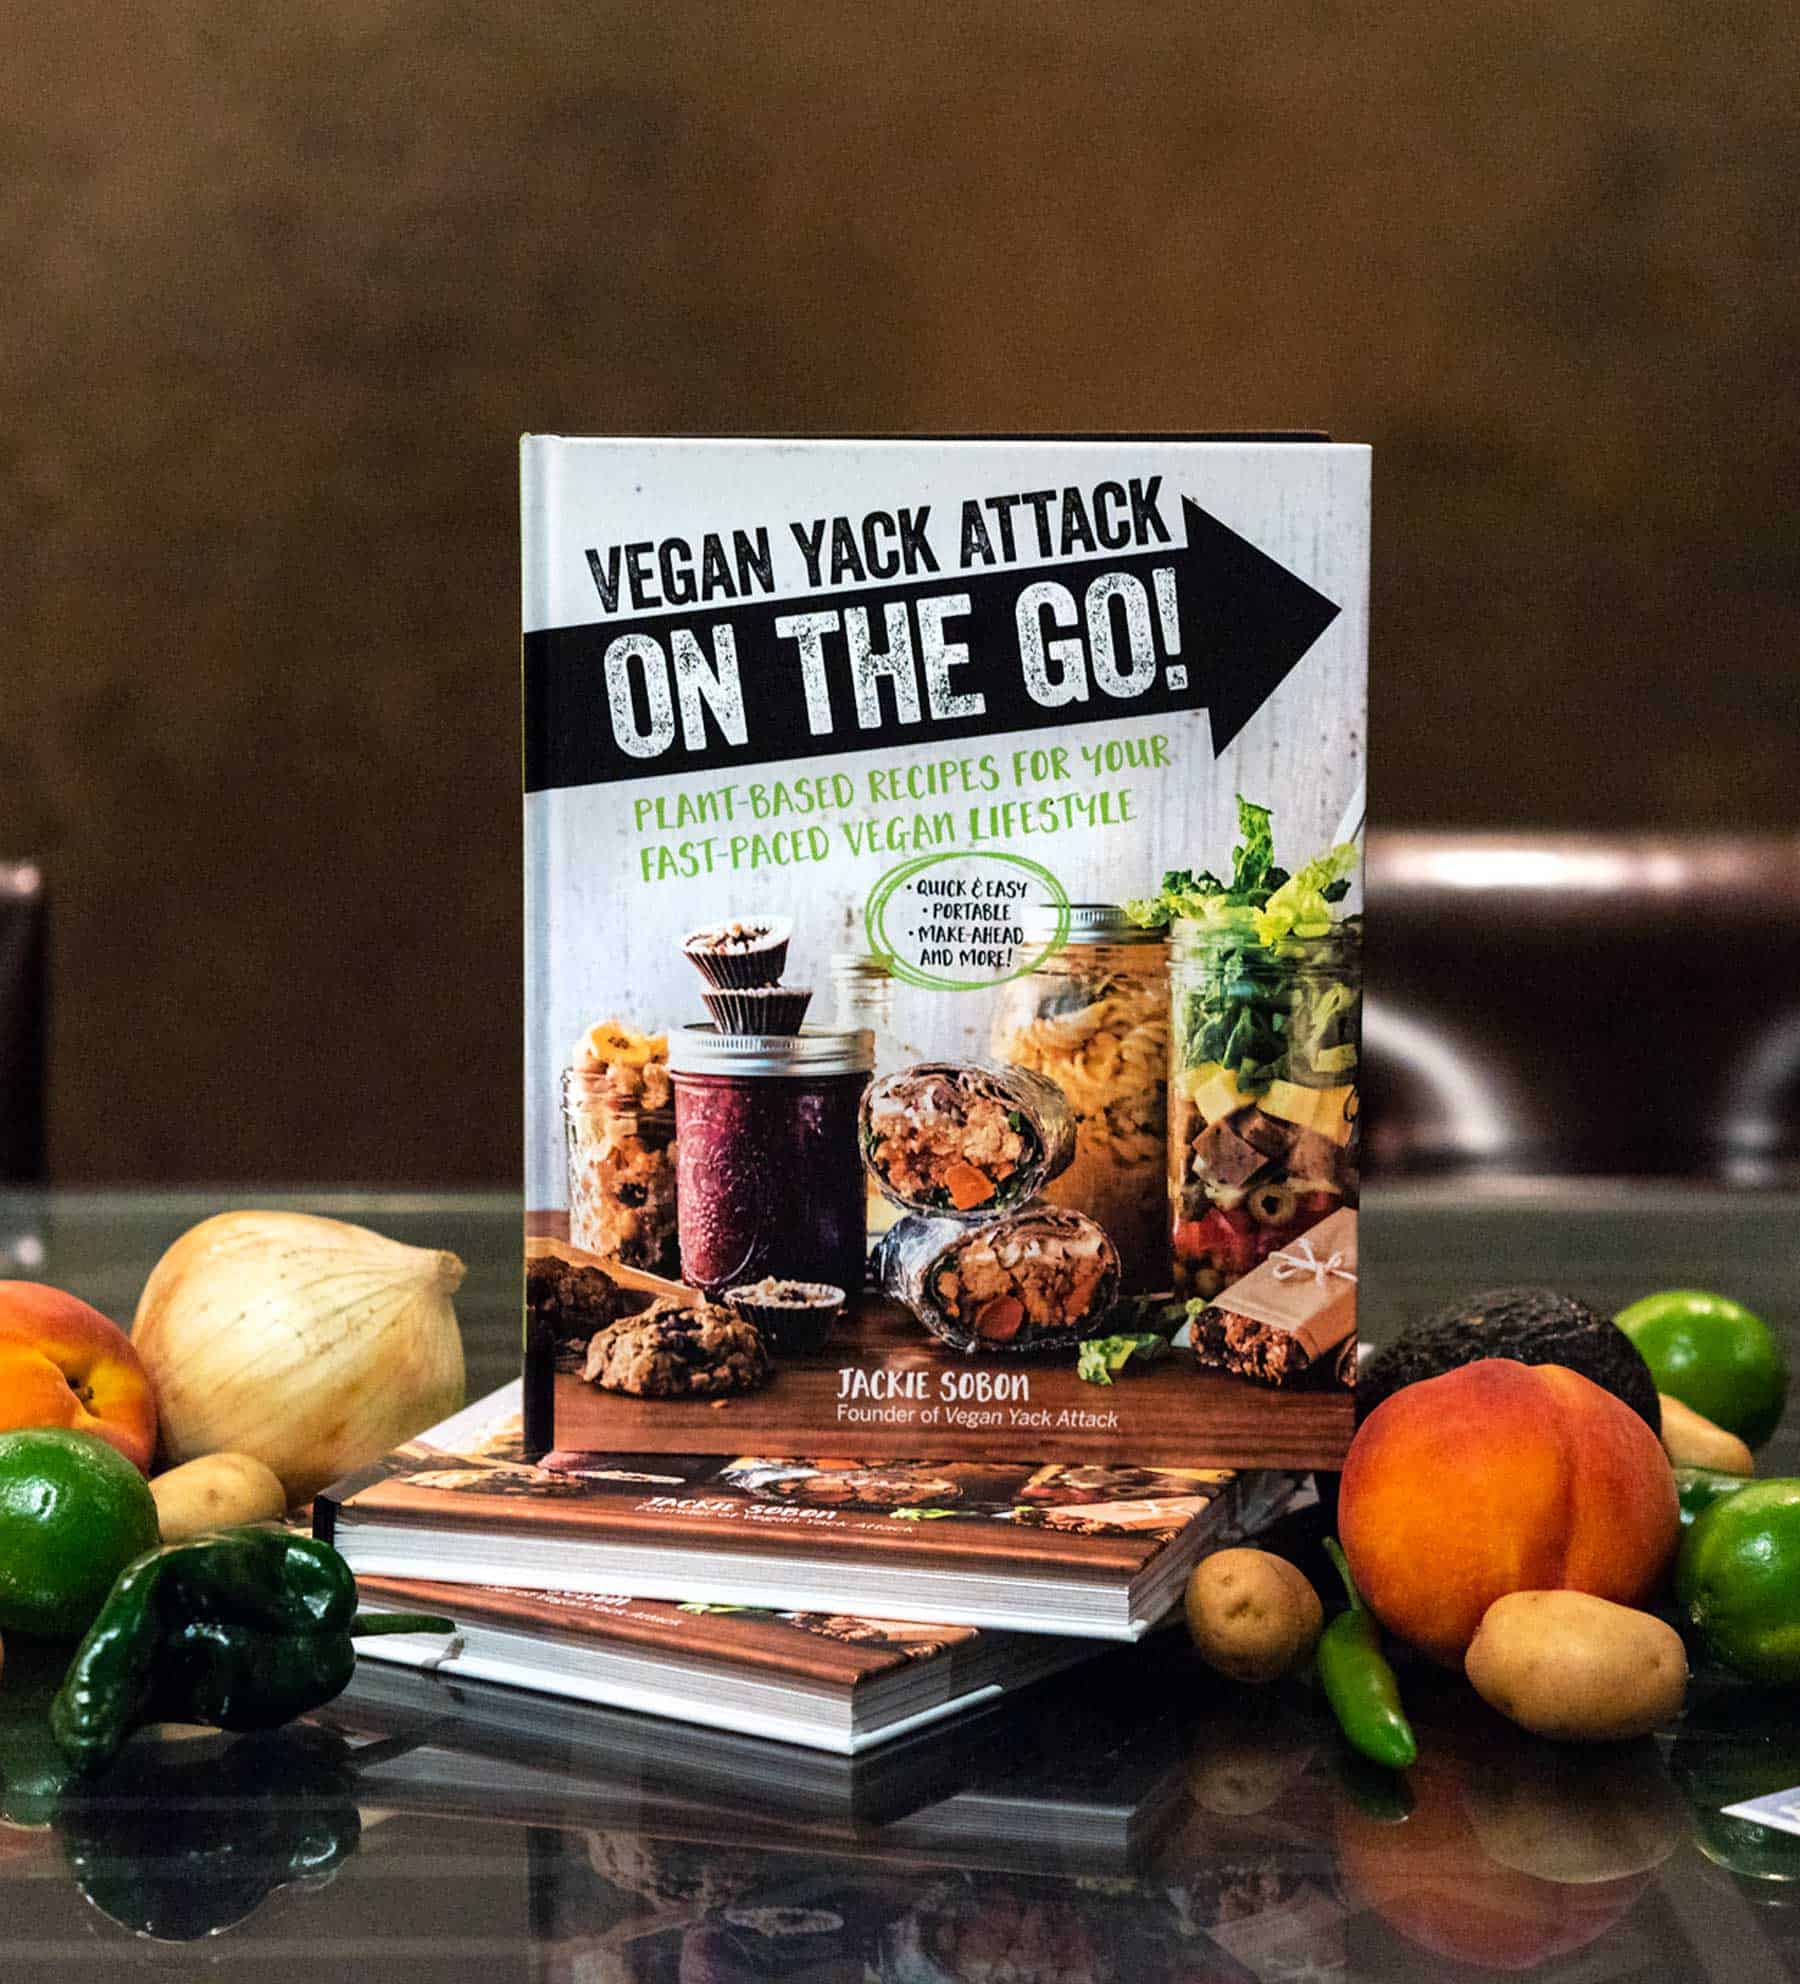 It's here! It's here! The release date of my second cookbook, Vegan Yack Attack On the Go! Quick recipes, make-ahead recipes, lunch, and more.